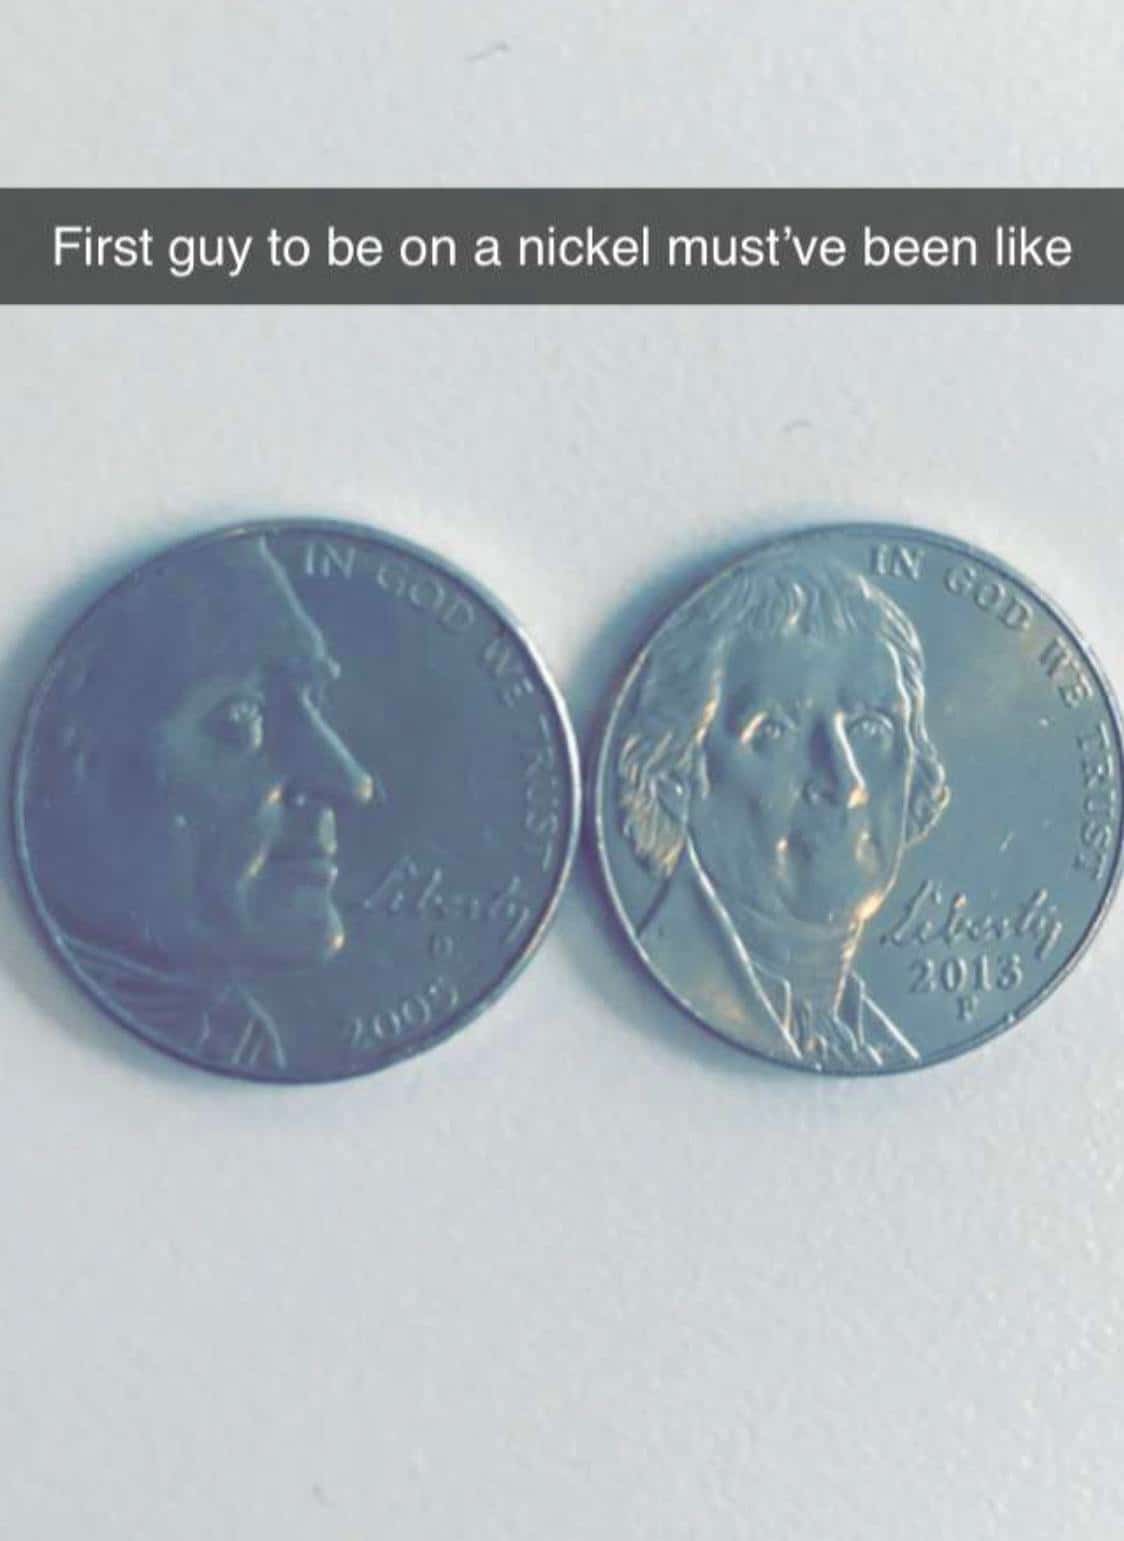 history history-memes history text: First guy to be on a nickel must've been like 2013 